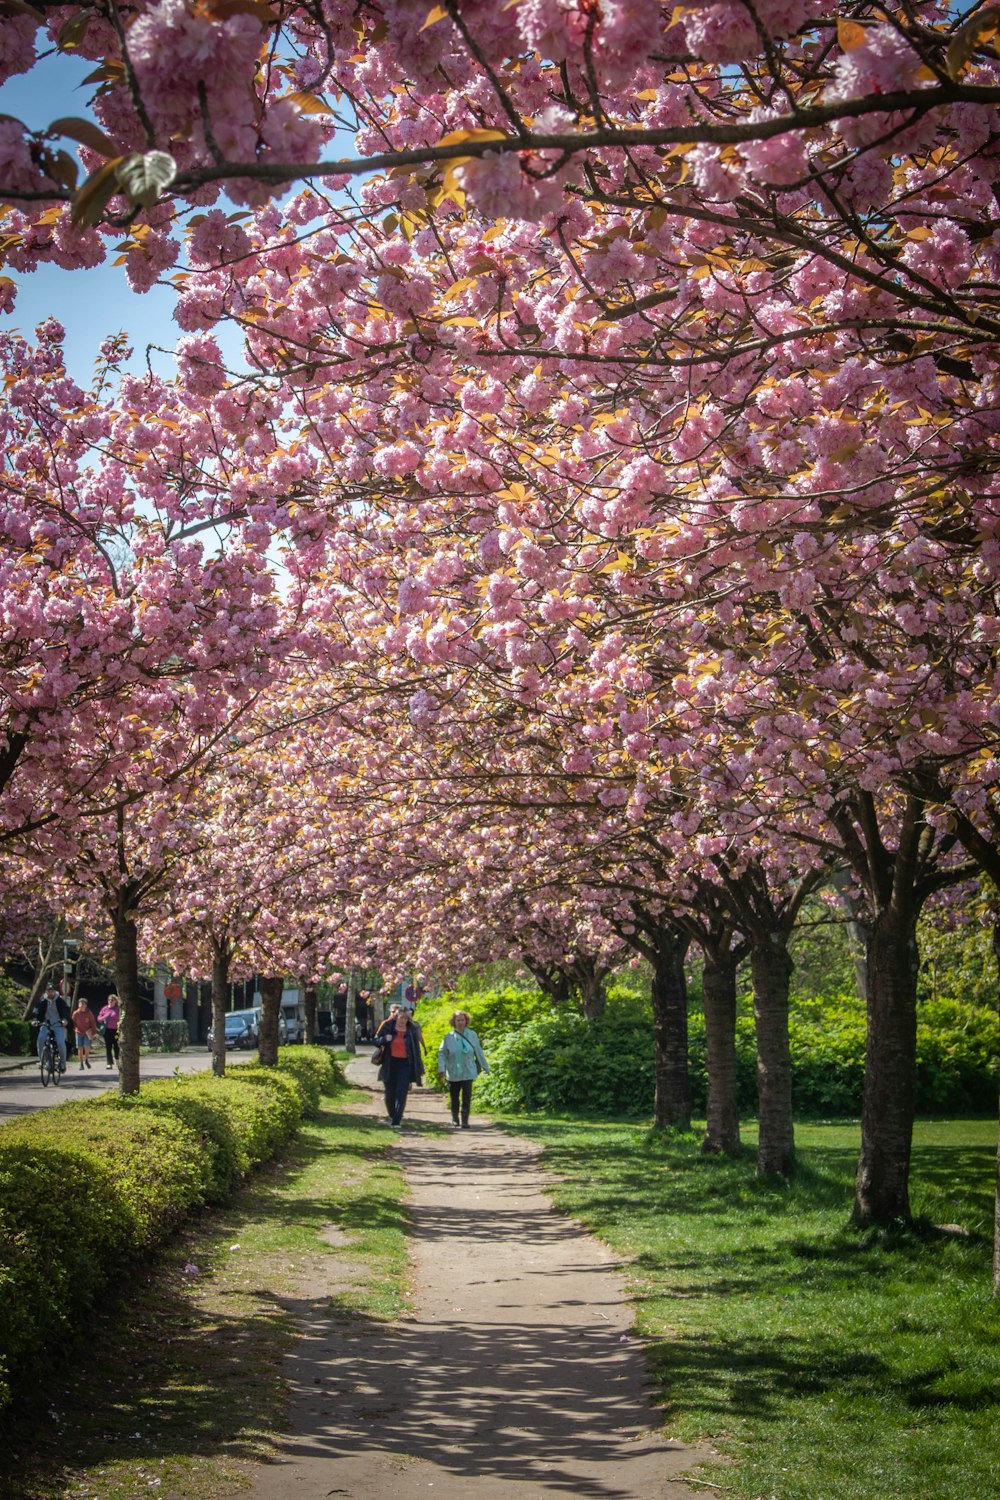 people walking down a path lined with pink flowers